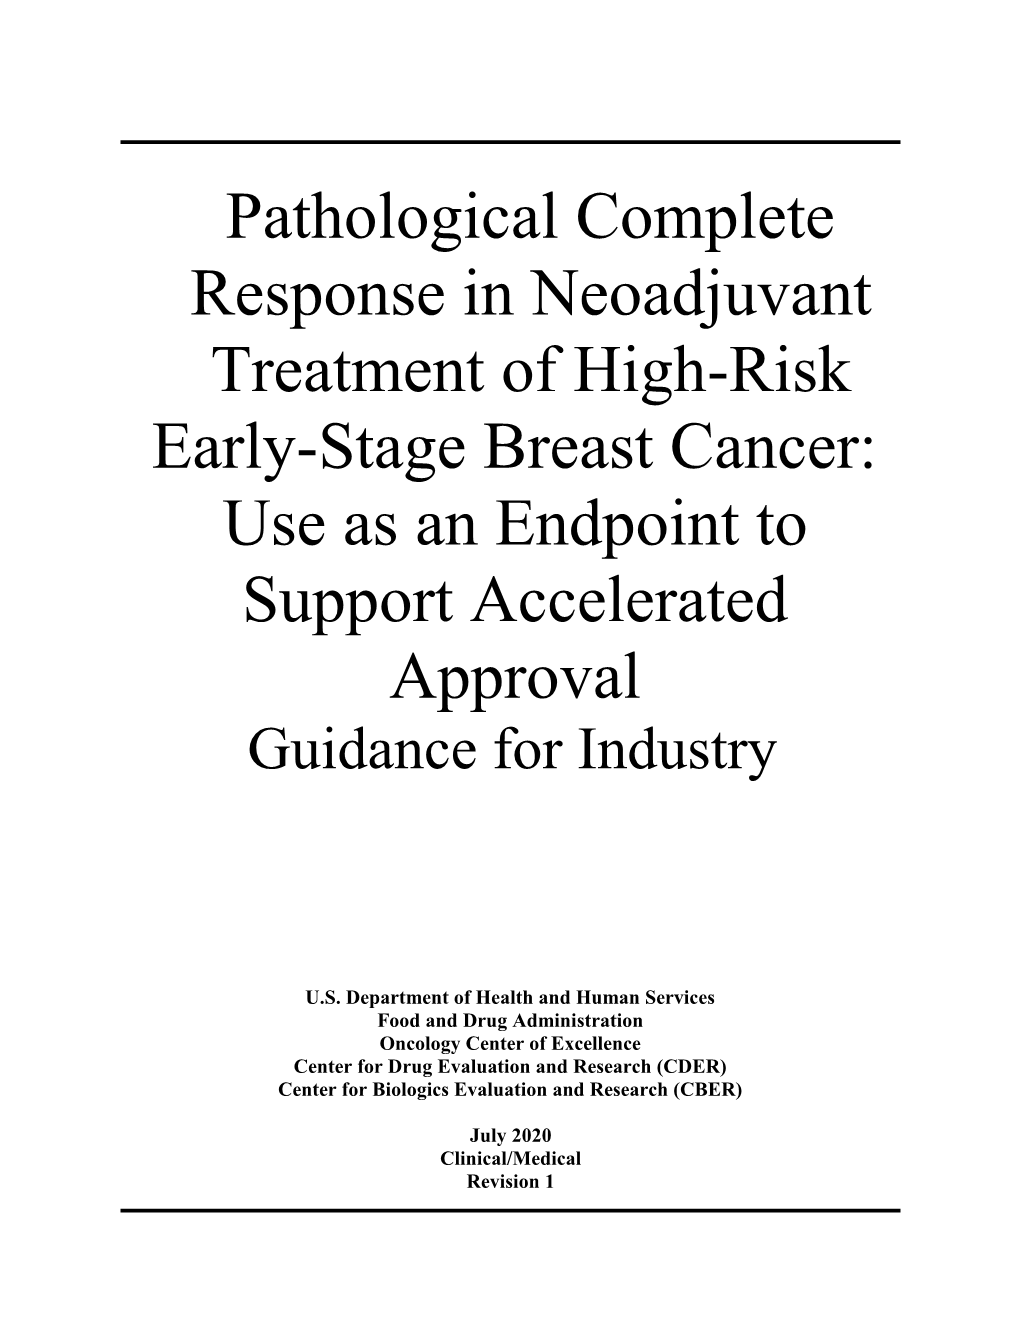 Pathological Complete Response in Neoadjuvant Treatment of High-Risk Early-Stage Breast Cancer